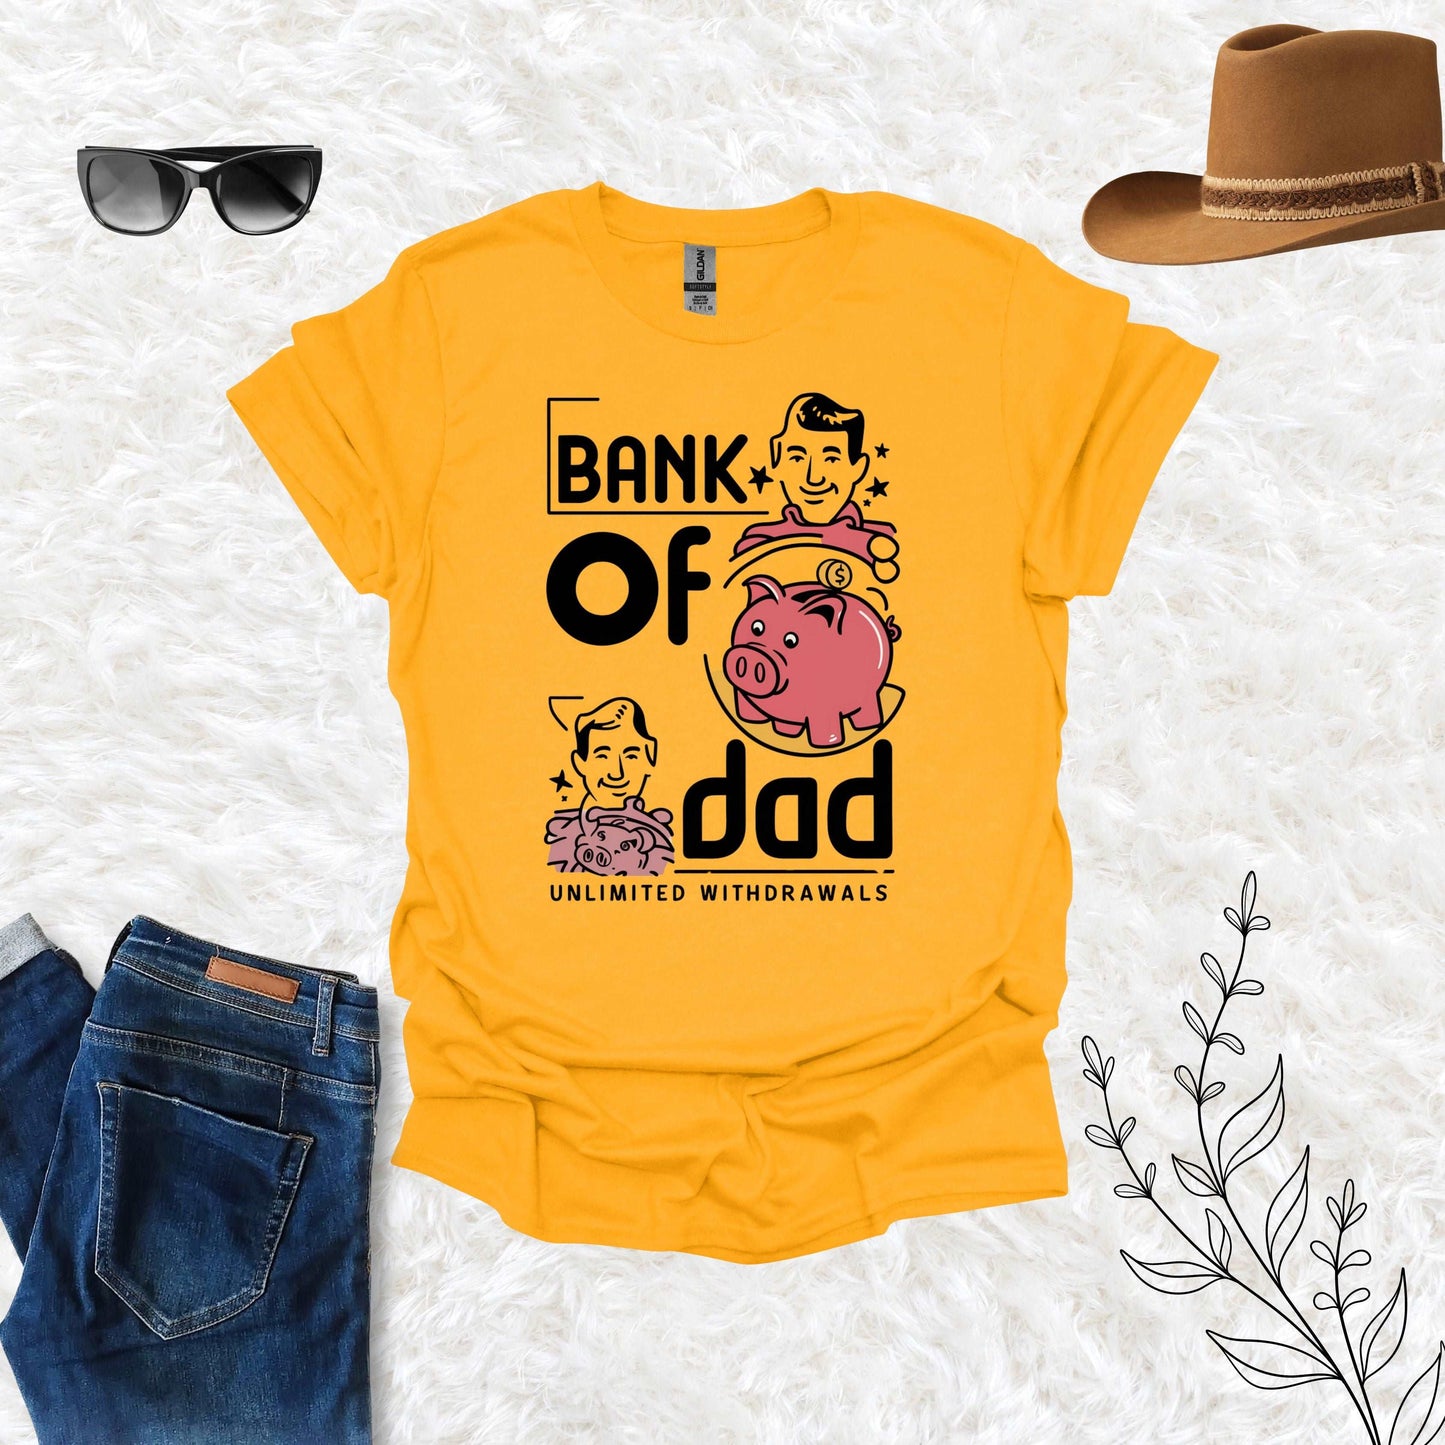 Bank of Dad Gold Shirt - Unlimited Withdrawal from My Father